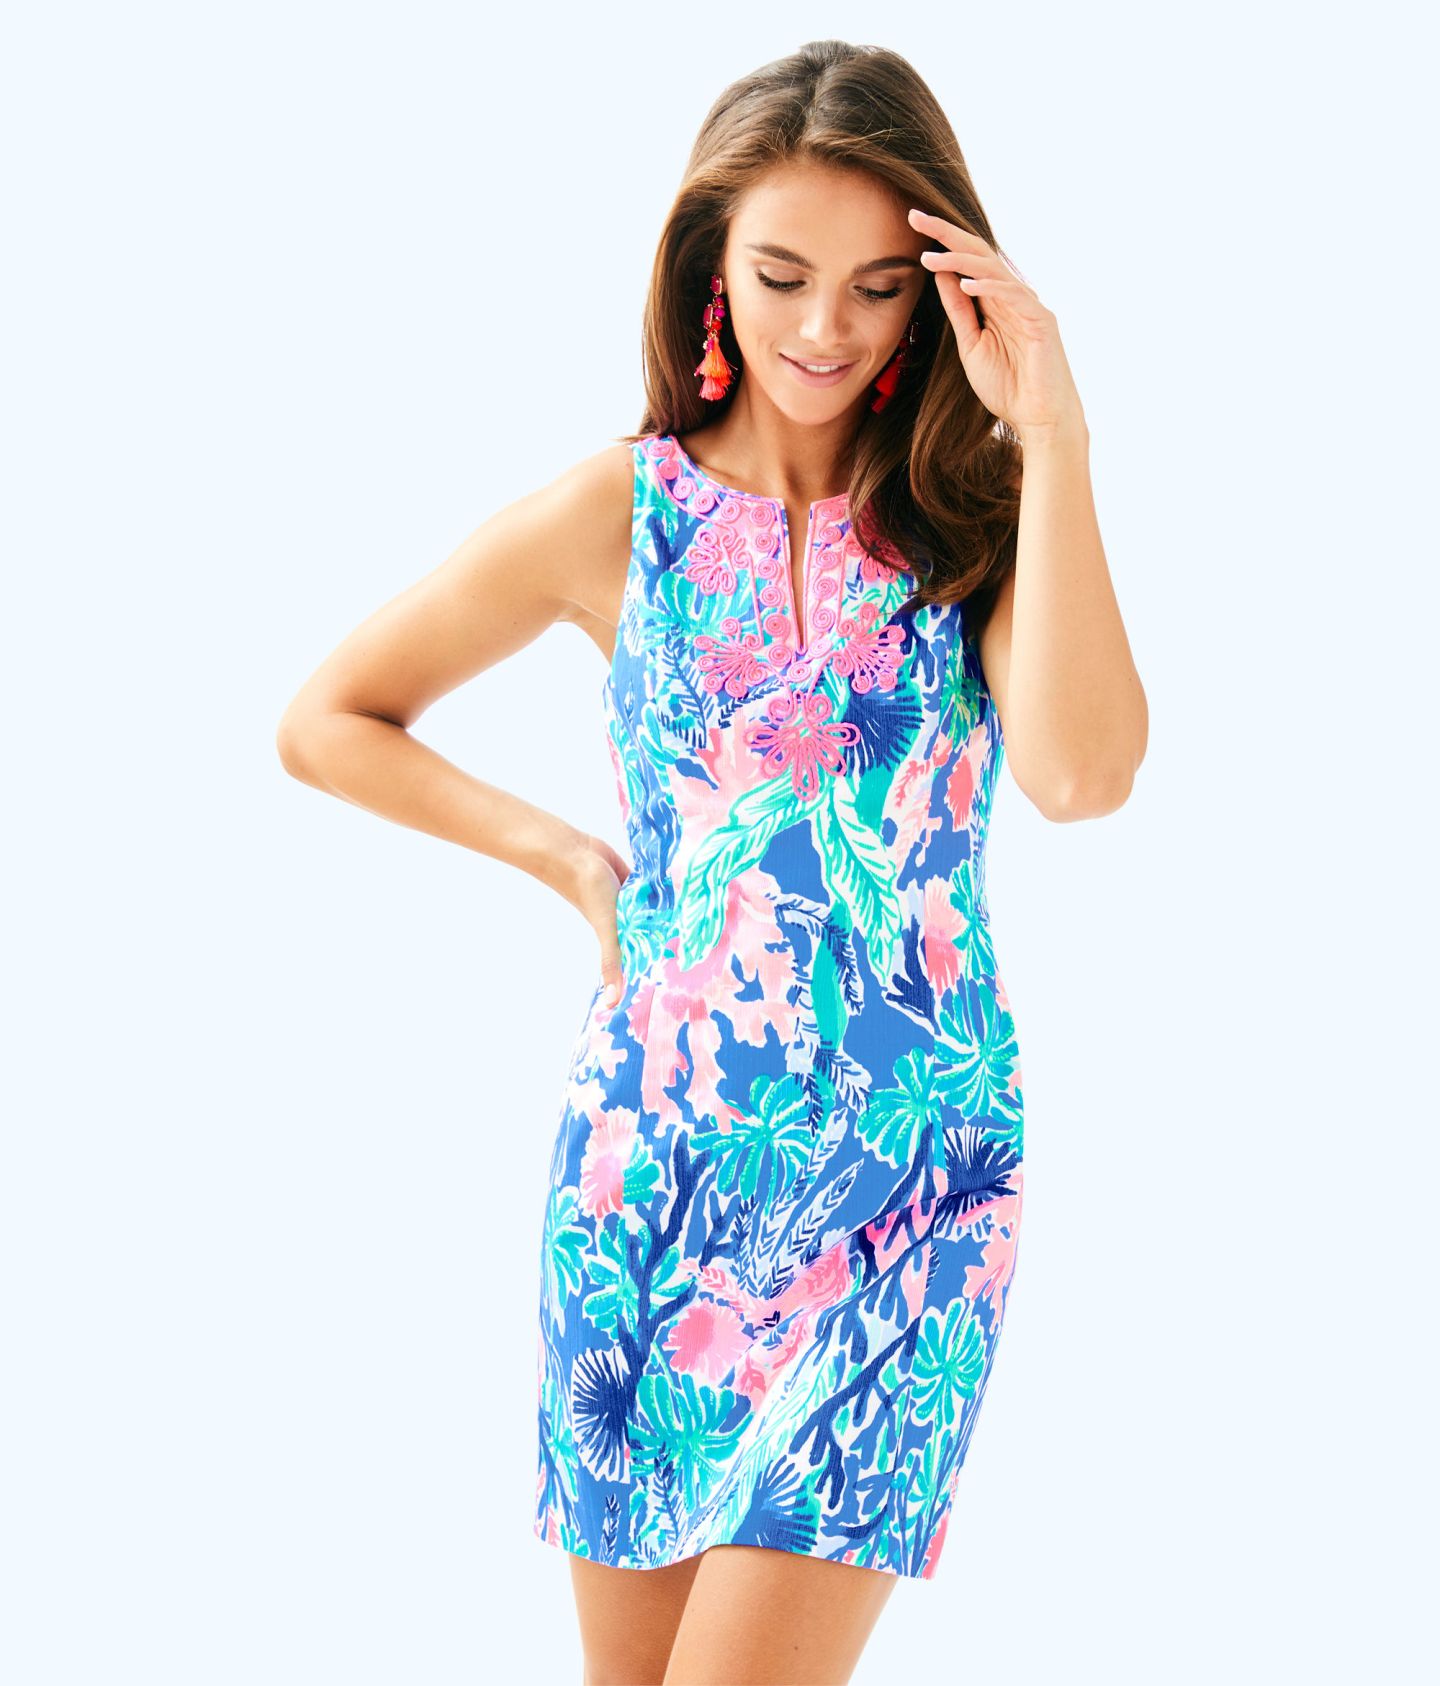 Lilly Pulitzer After Party Sale: How to Shop & What to Buy